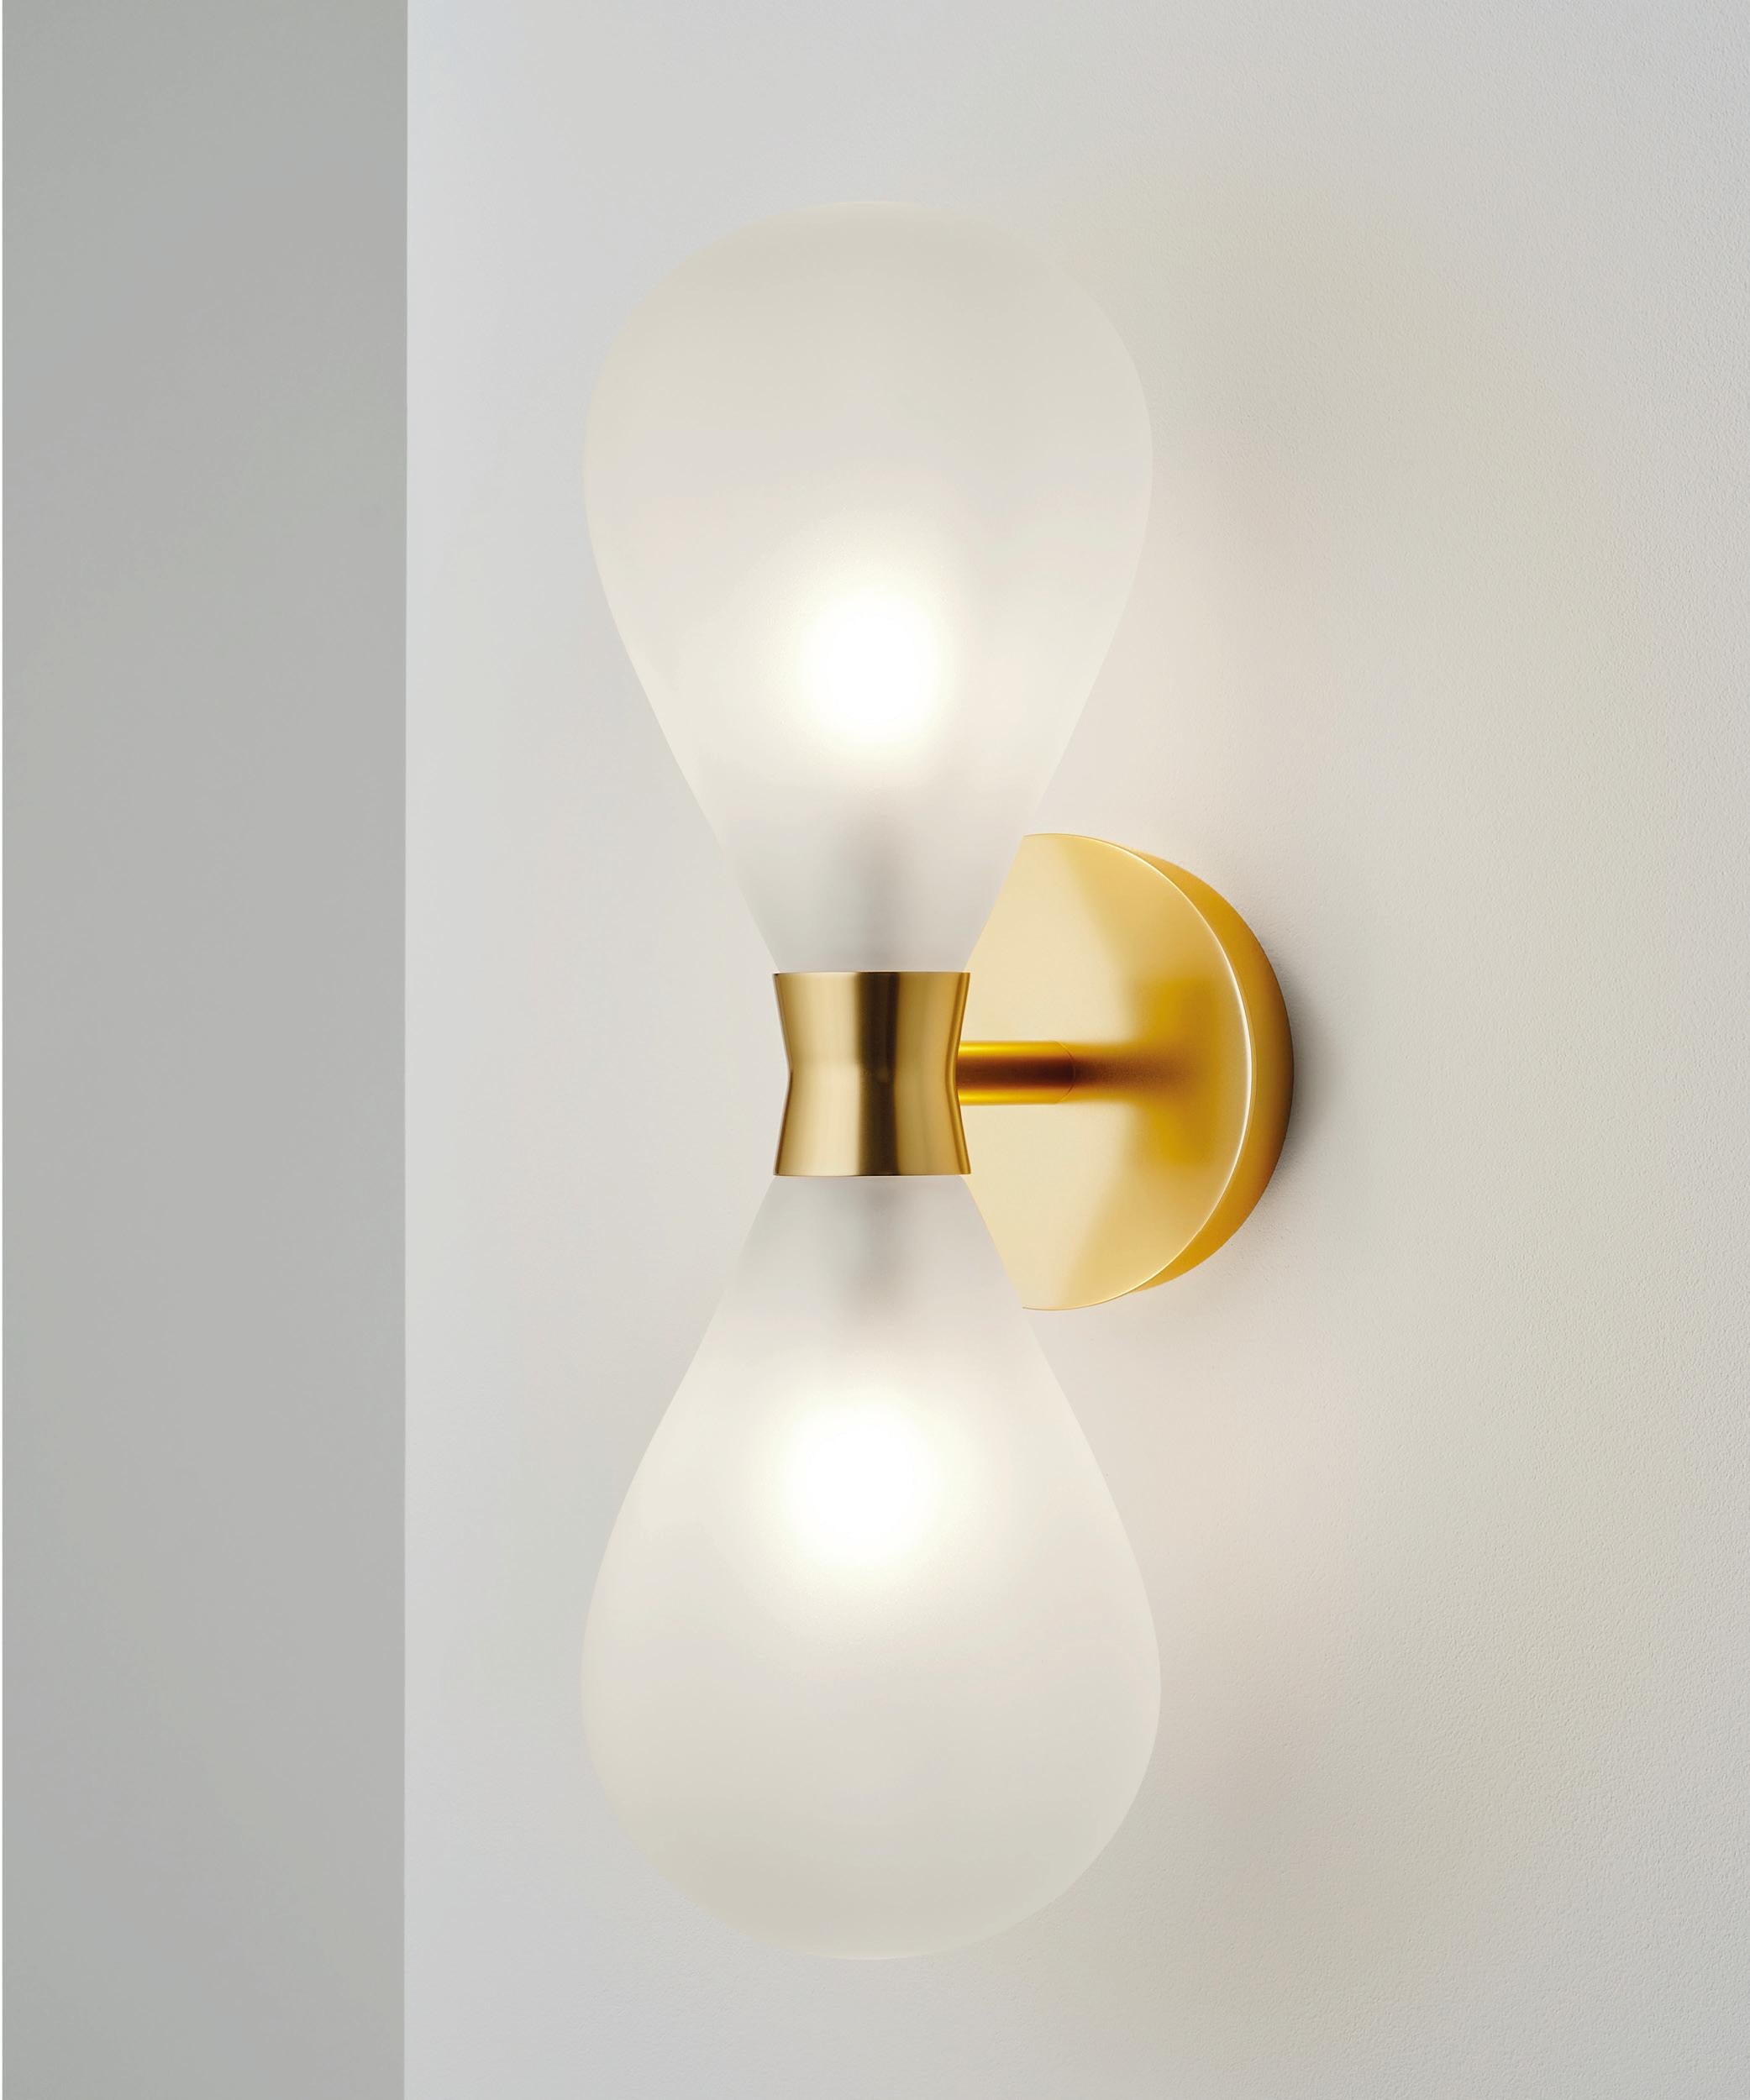 Aluminum Cintola Wall Light Twin in Polished Aluminium with Bronze Handblown Glass Globes For Sale